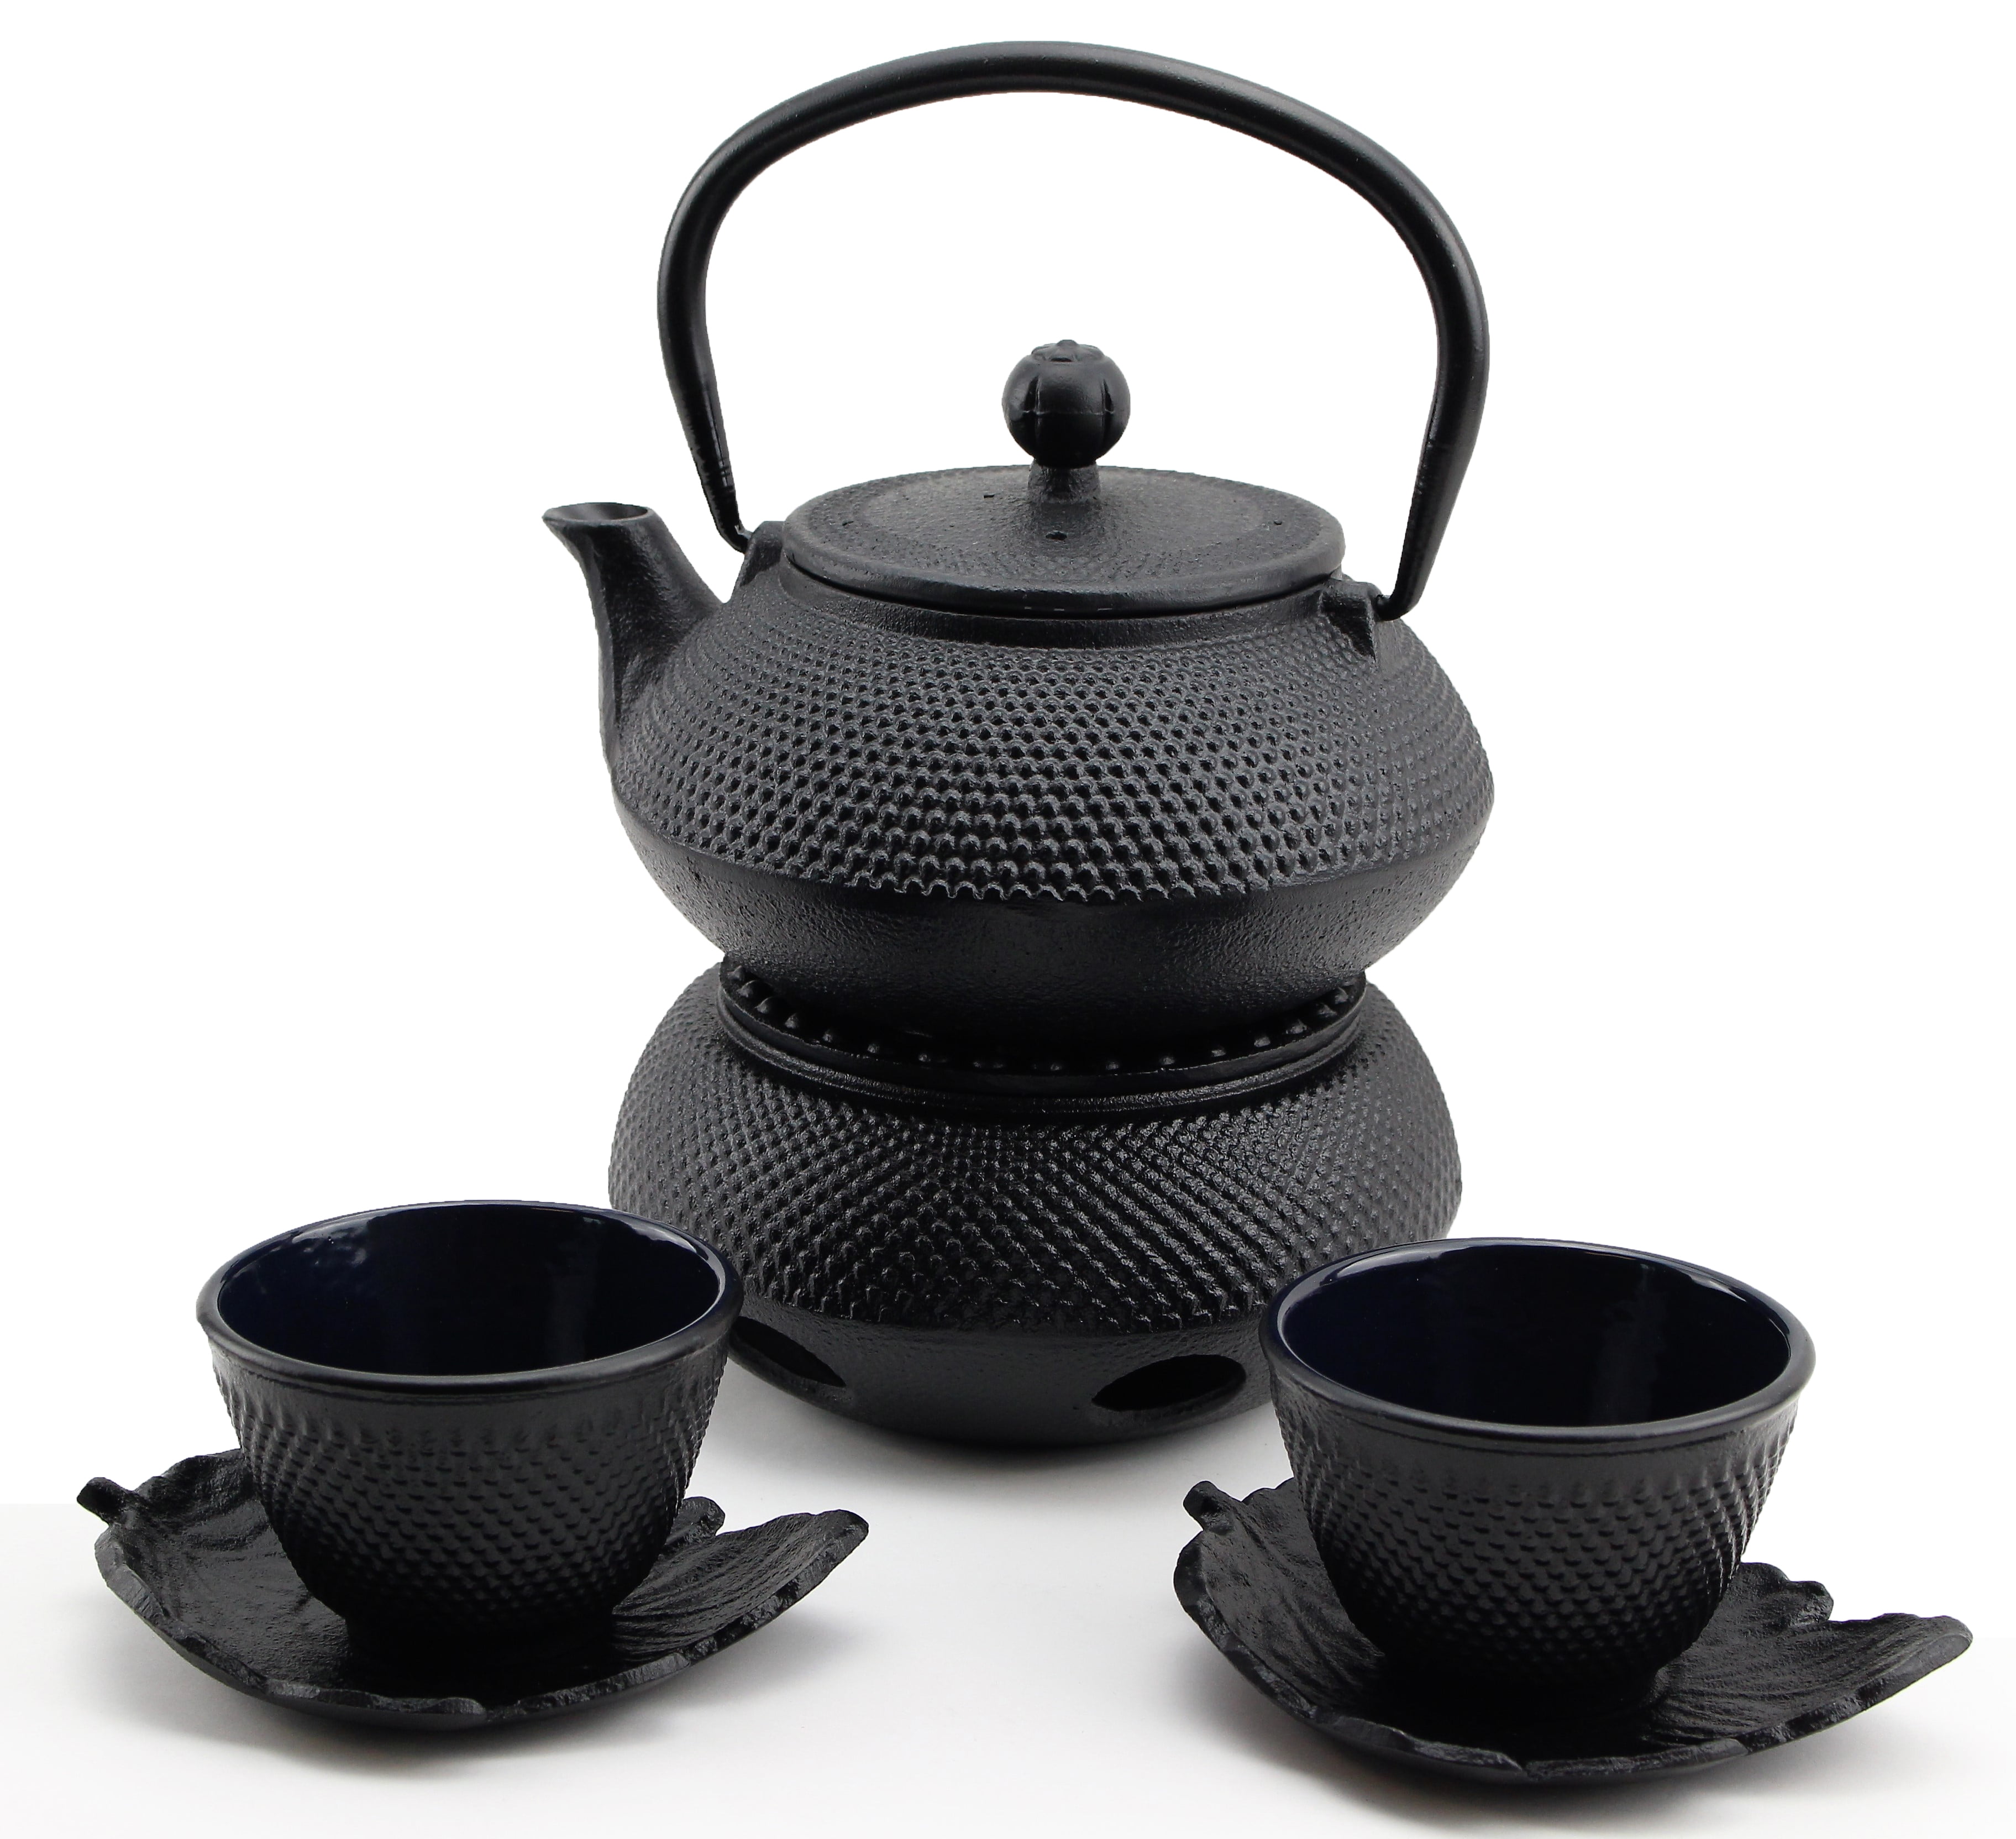 Our Black Bamboo Cast Iron Teapot, or Tetsubin, holds 20.4 oz.